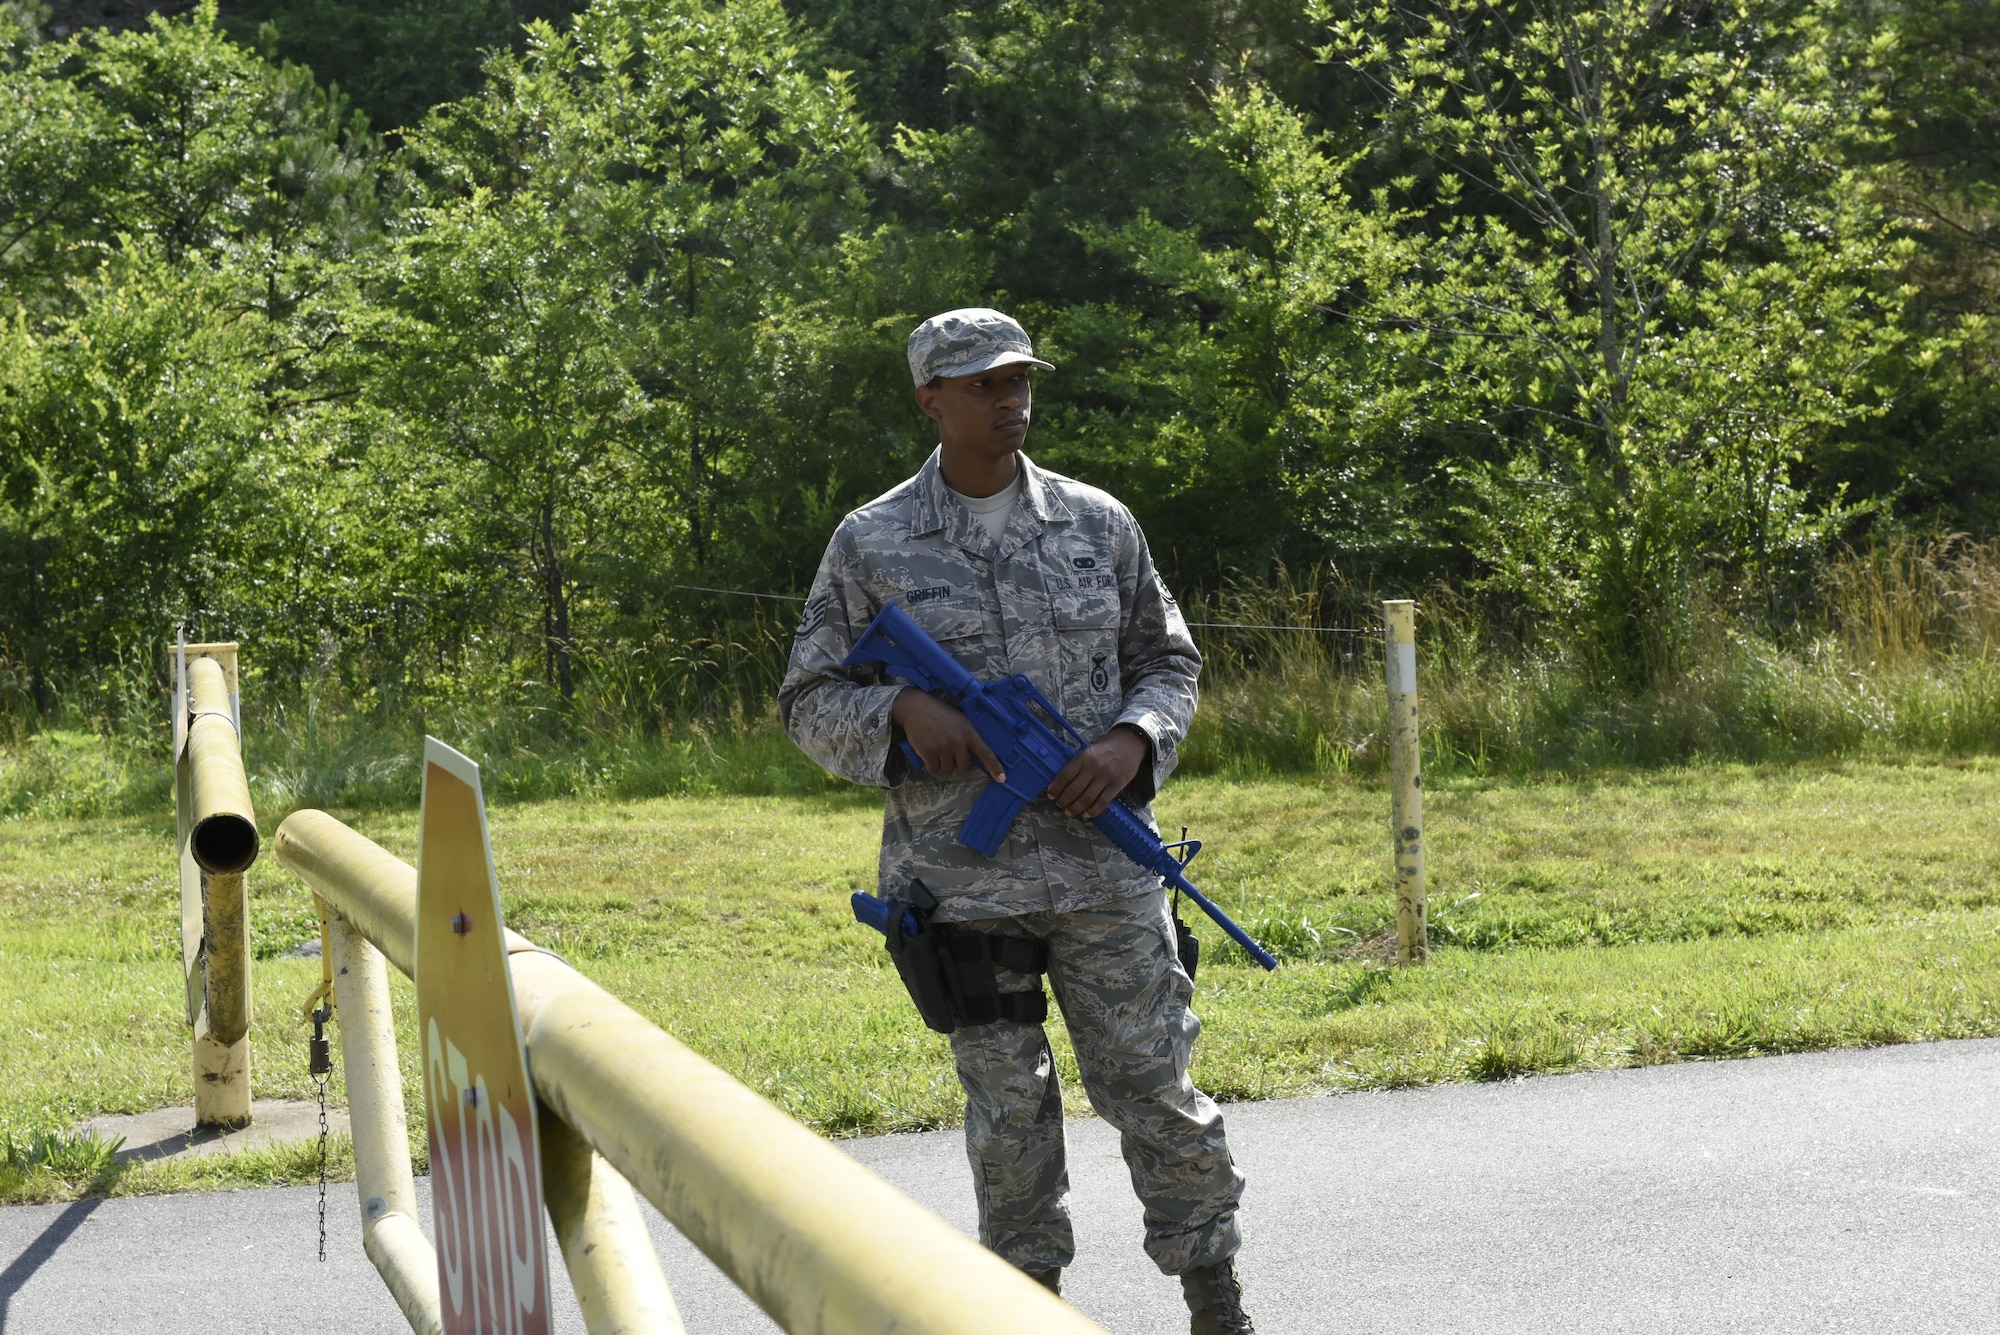 U.S. Air Force Staff Sgt. Brandon Griffin of the 145th Airlift Wing Security Forces, guards a checkpoint durng and scenario of Vigilant Catamount, an interagency domestic exercise between local, state, and military personnel in North Carolina, in the mountains of Fontana Dam North Carolina, June 12, 2017. Vigilant Catamount is a multi-day exercise testing emergency response, with the second phase involving a terrorist bomb threat to Fontana Dam.